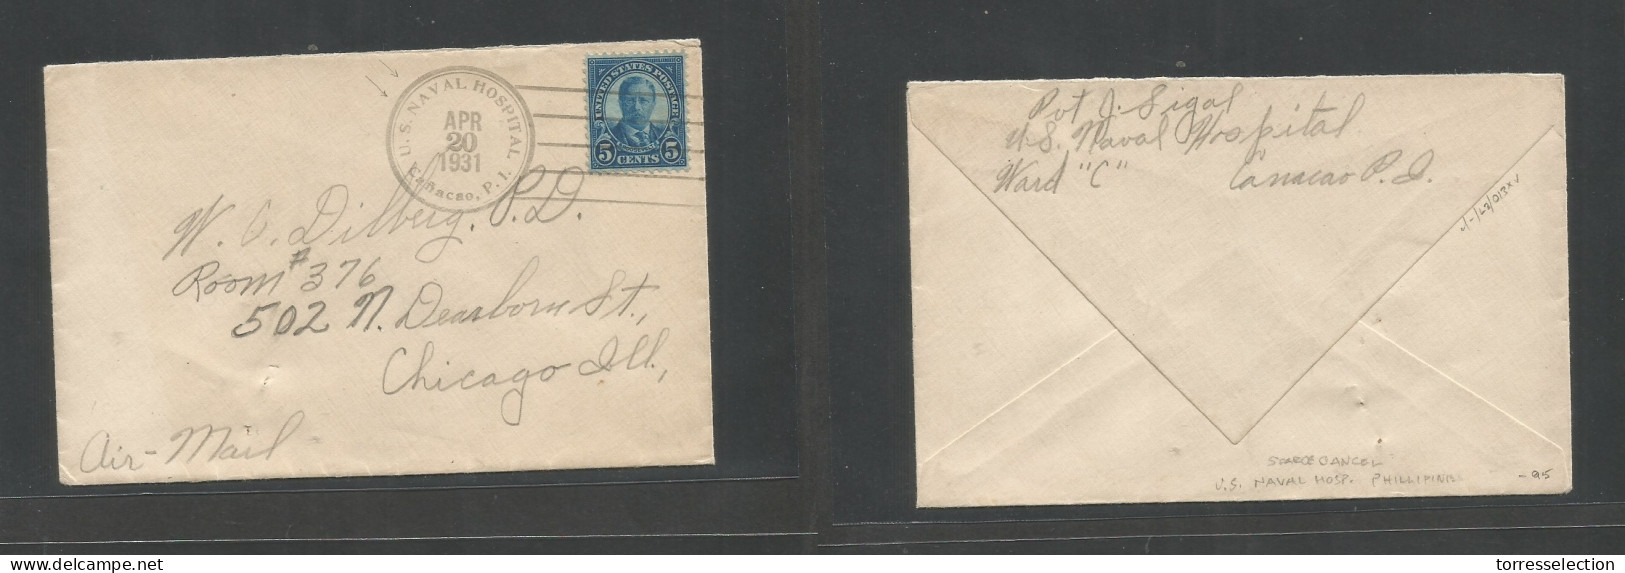 PHILIPPINES. 1931 (20 Apr) US Naval Hospital, Cañacao - USA, Chicago, Ill. Fkd Env 5c Blue, Tied Cds Grill. Airmail Endo - Philippines